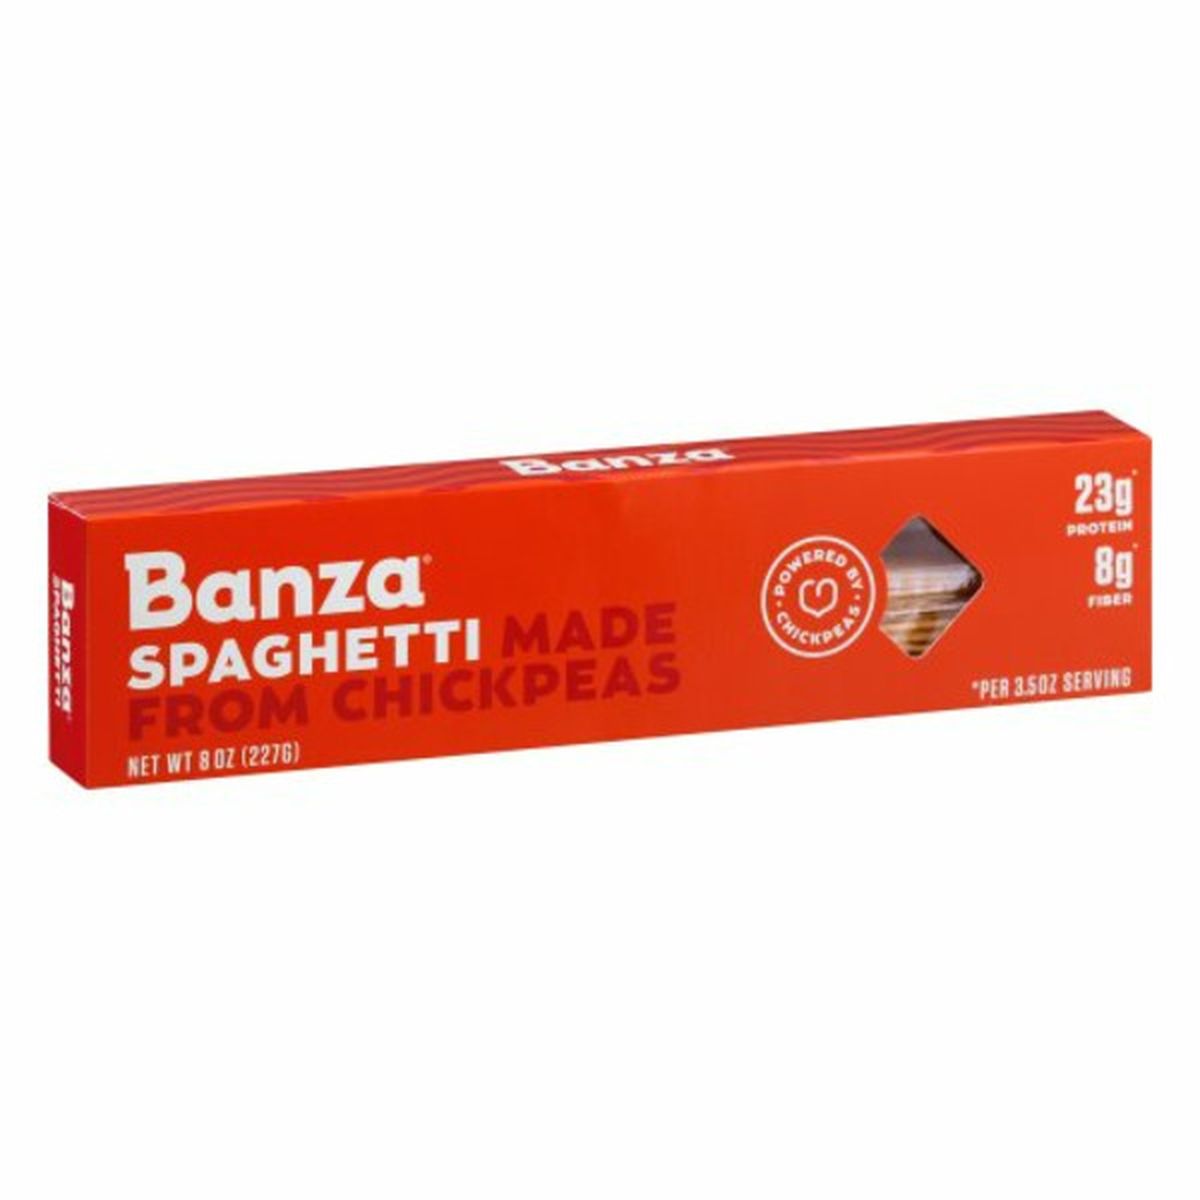 Calories in Banza Spaghetti, Made from Chickpeas